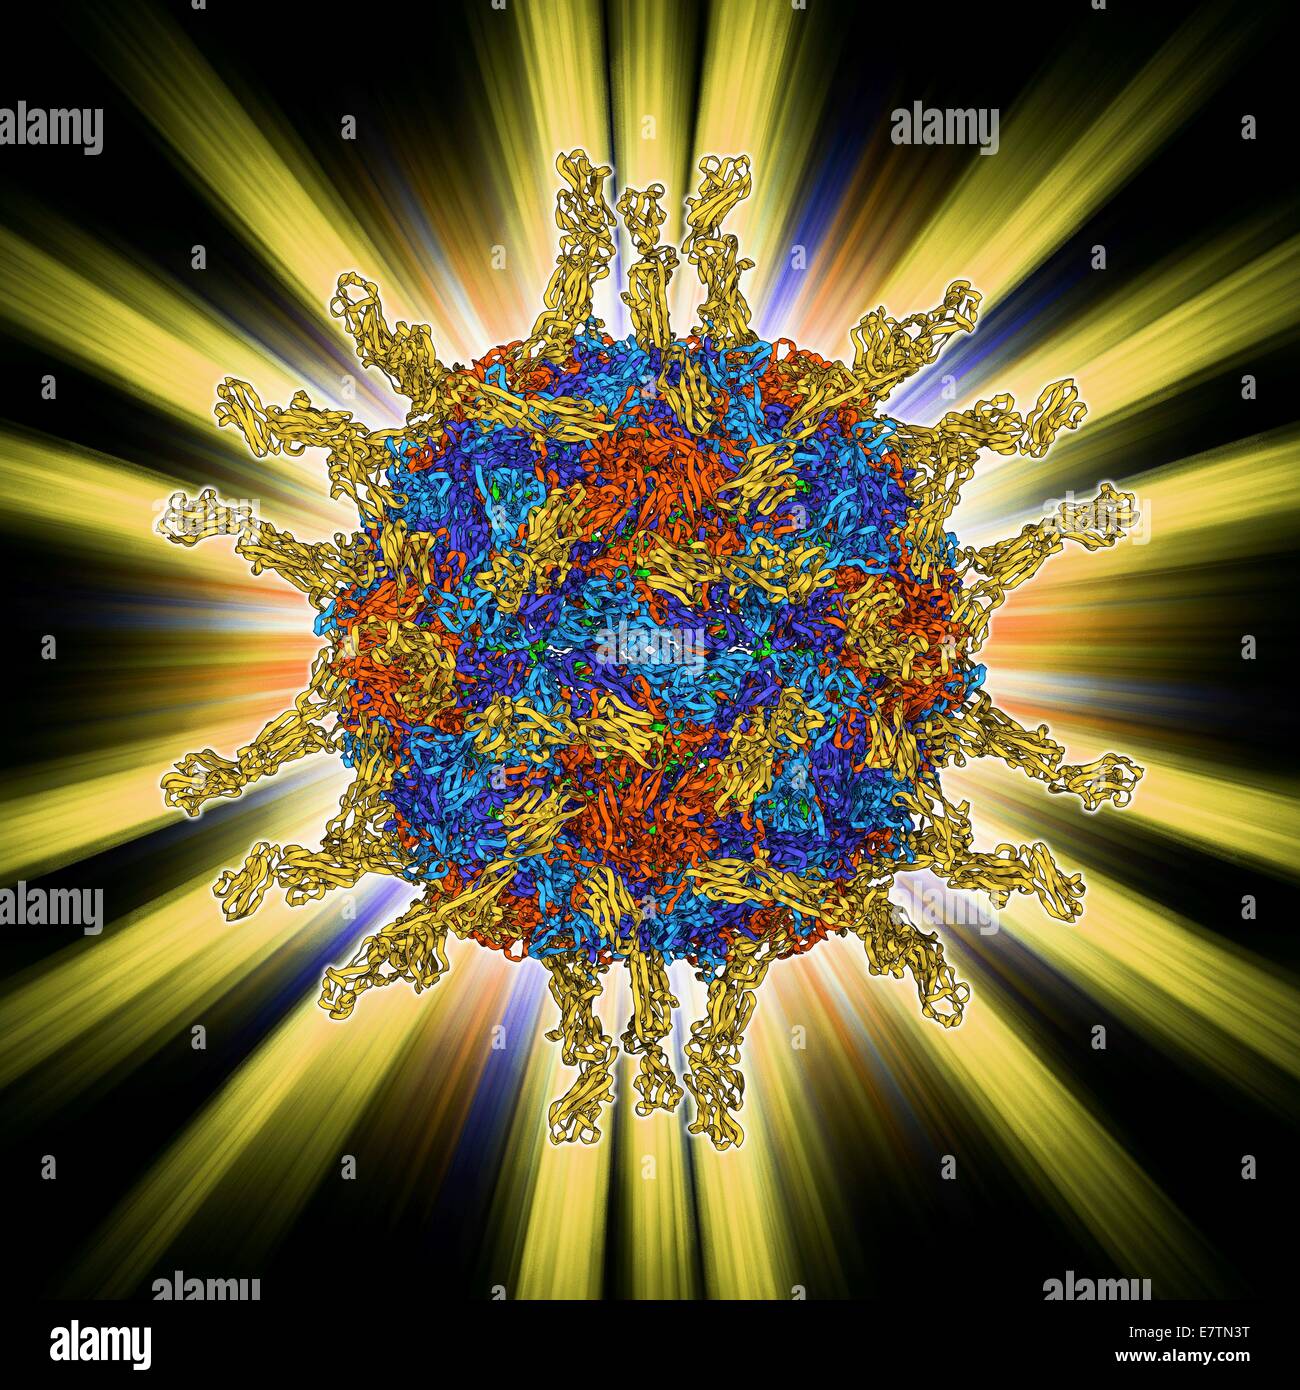 Human poliovirus particle. Molecular model of the capsid of the human poliovirus. The capsid is a protein coat that encloses the virus's genetic information (genome), stored as RNA (ribonucleic acid). The protruding proteins are receptors, which enable th Stock Photo